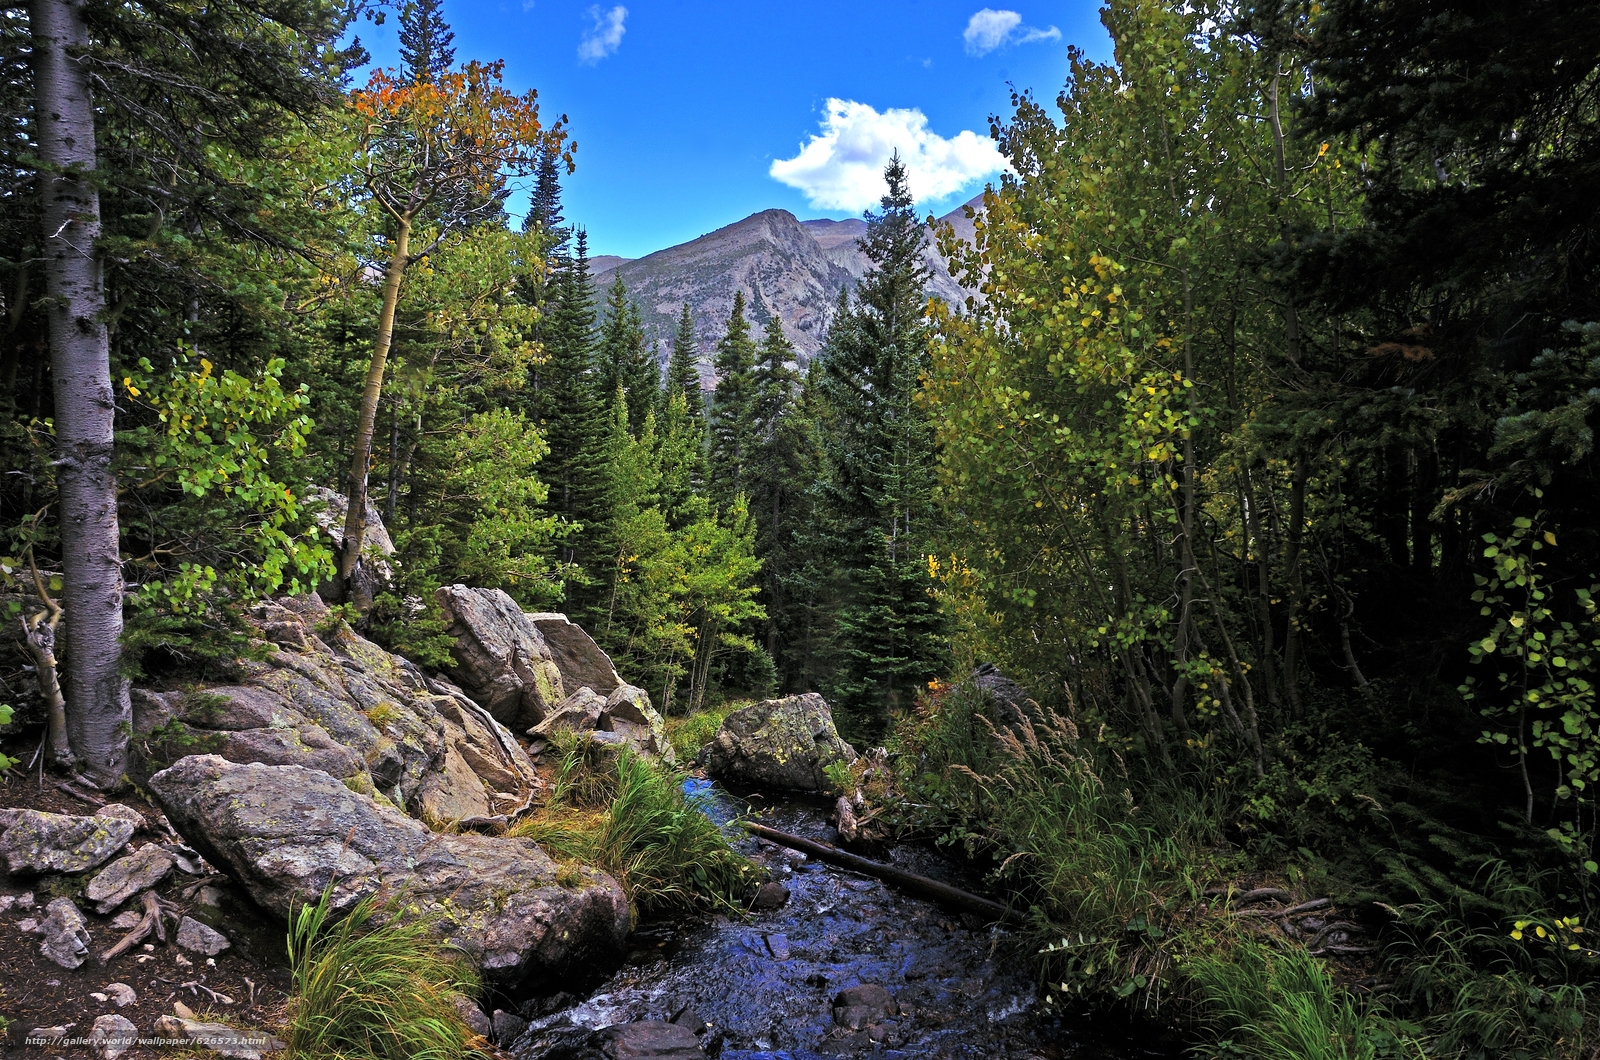 Download wallpaper Rocky Mountain National Park river Mountains